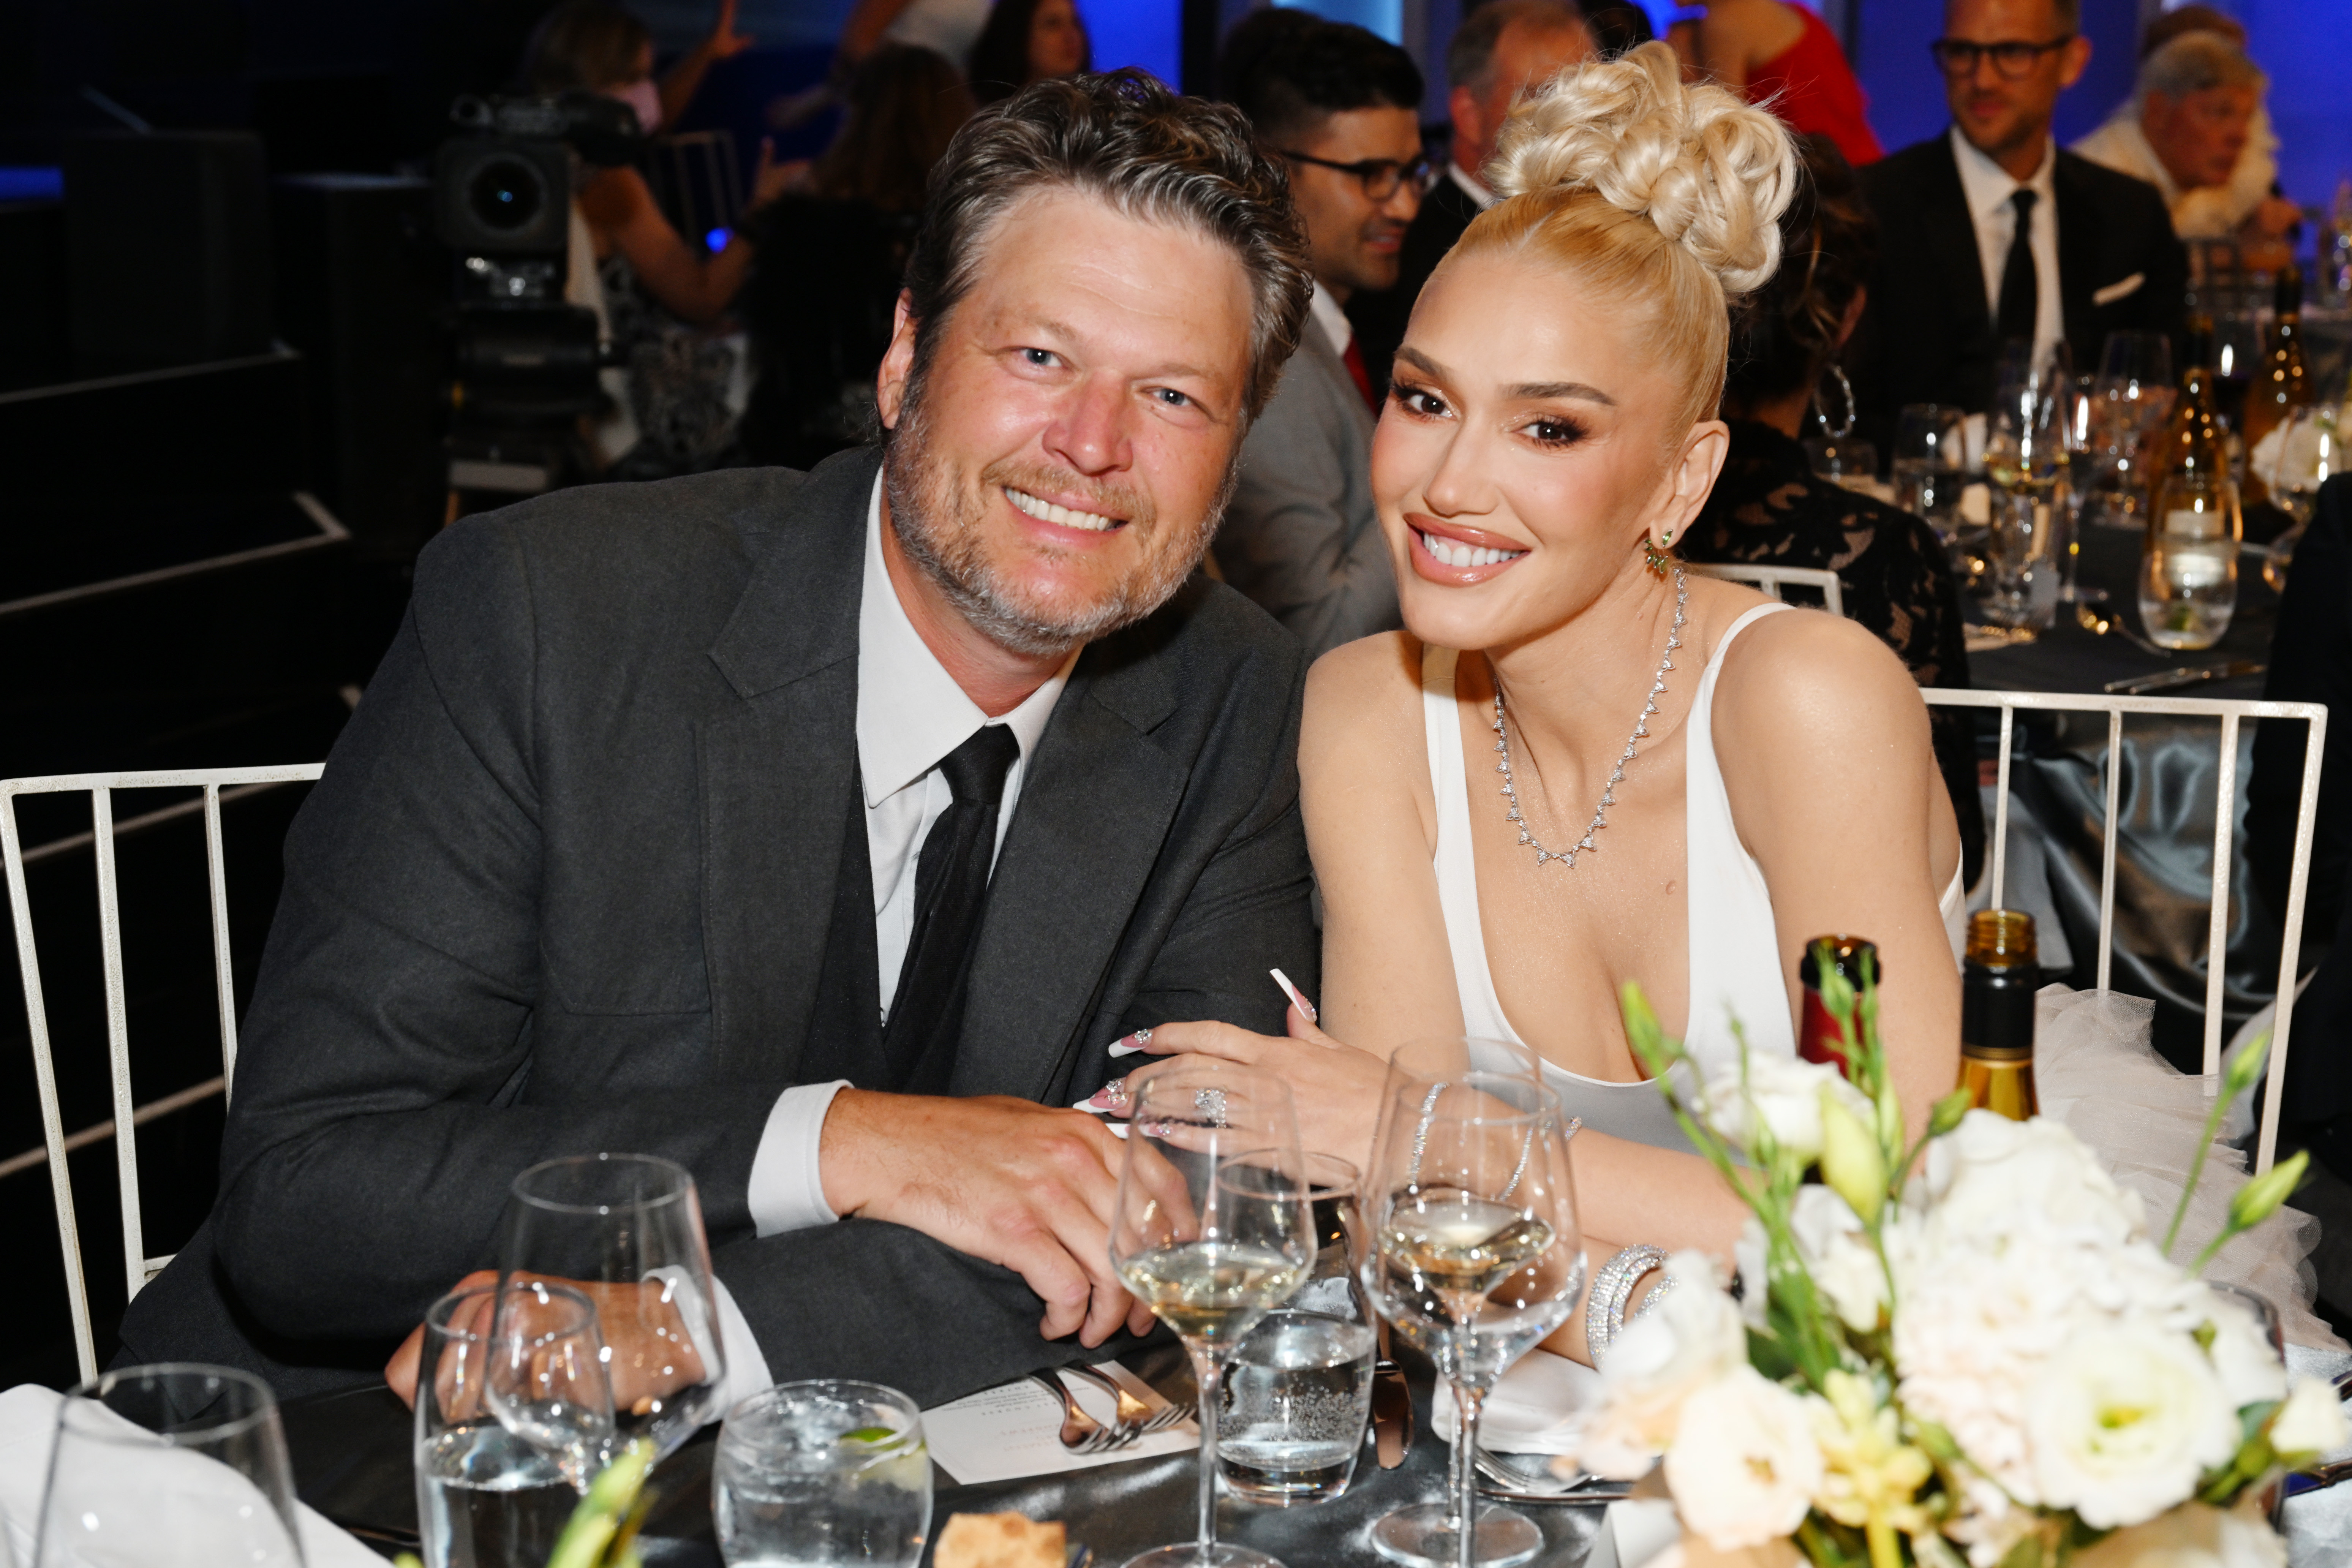 Fans noticed she posted and deleted a video of her husband Blake Shelton